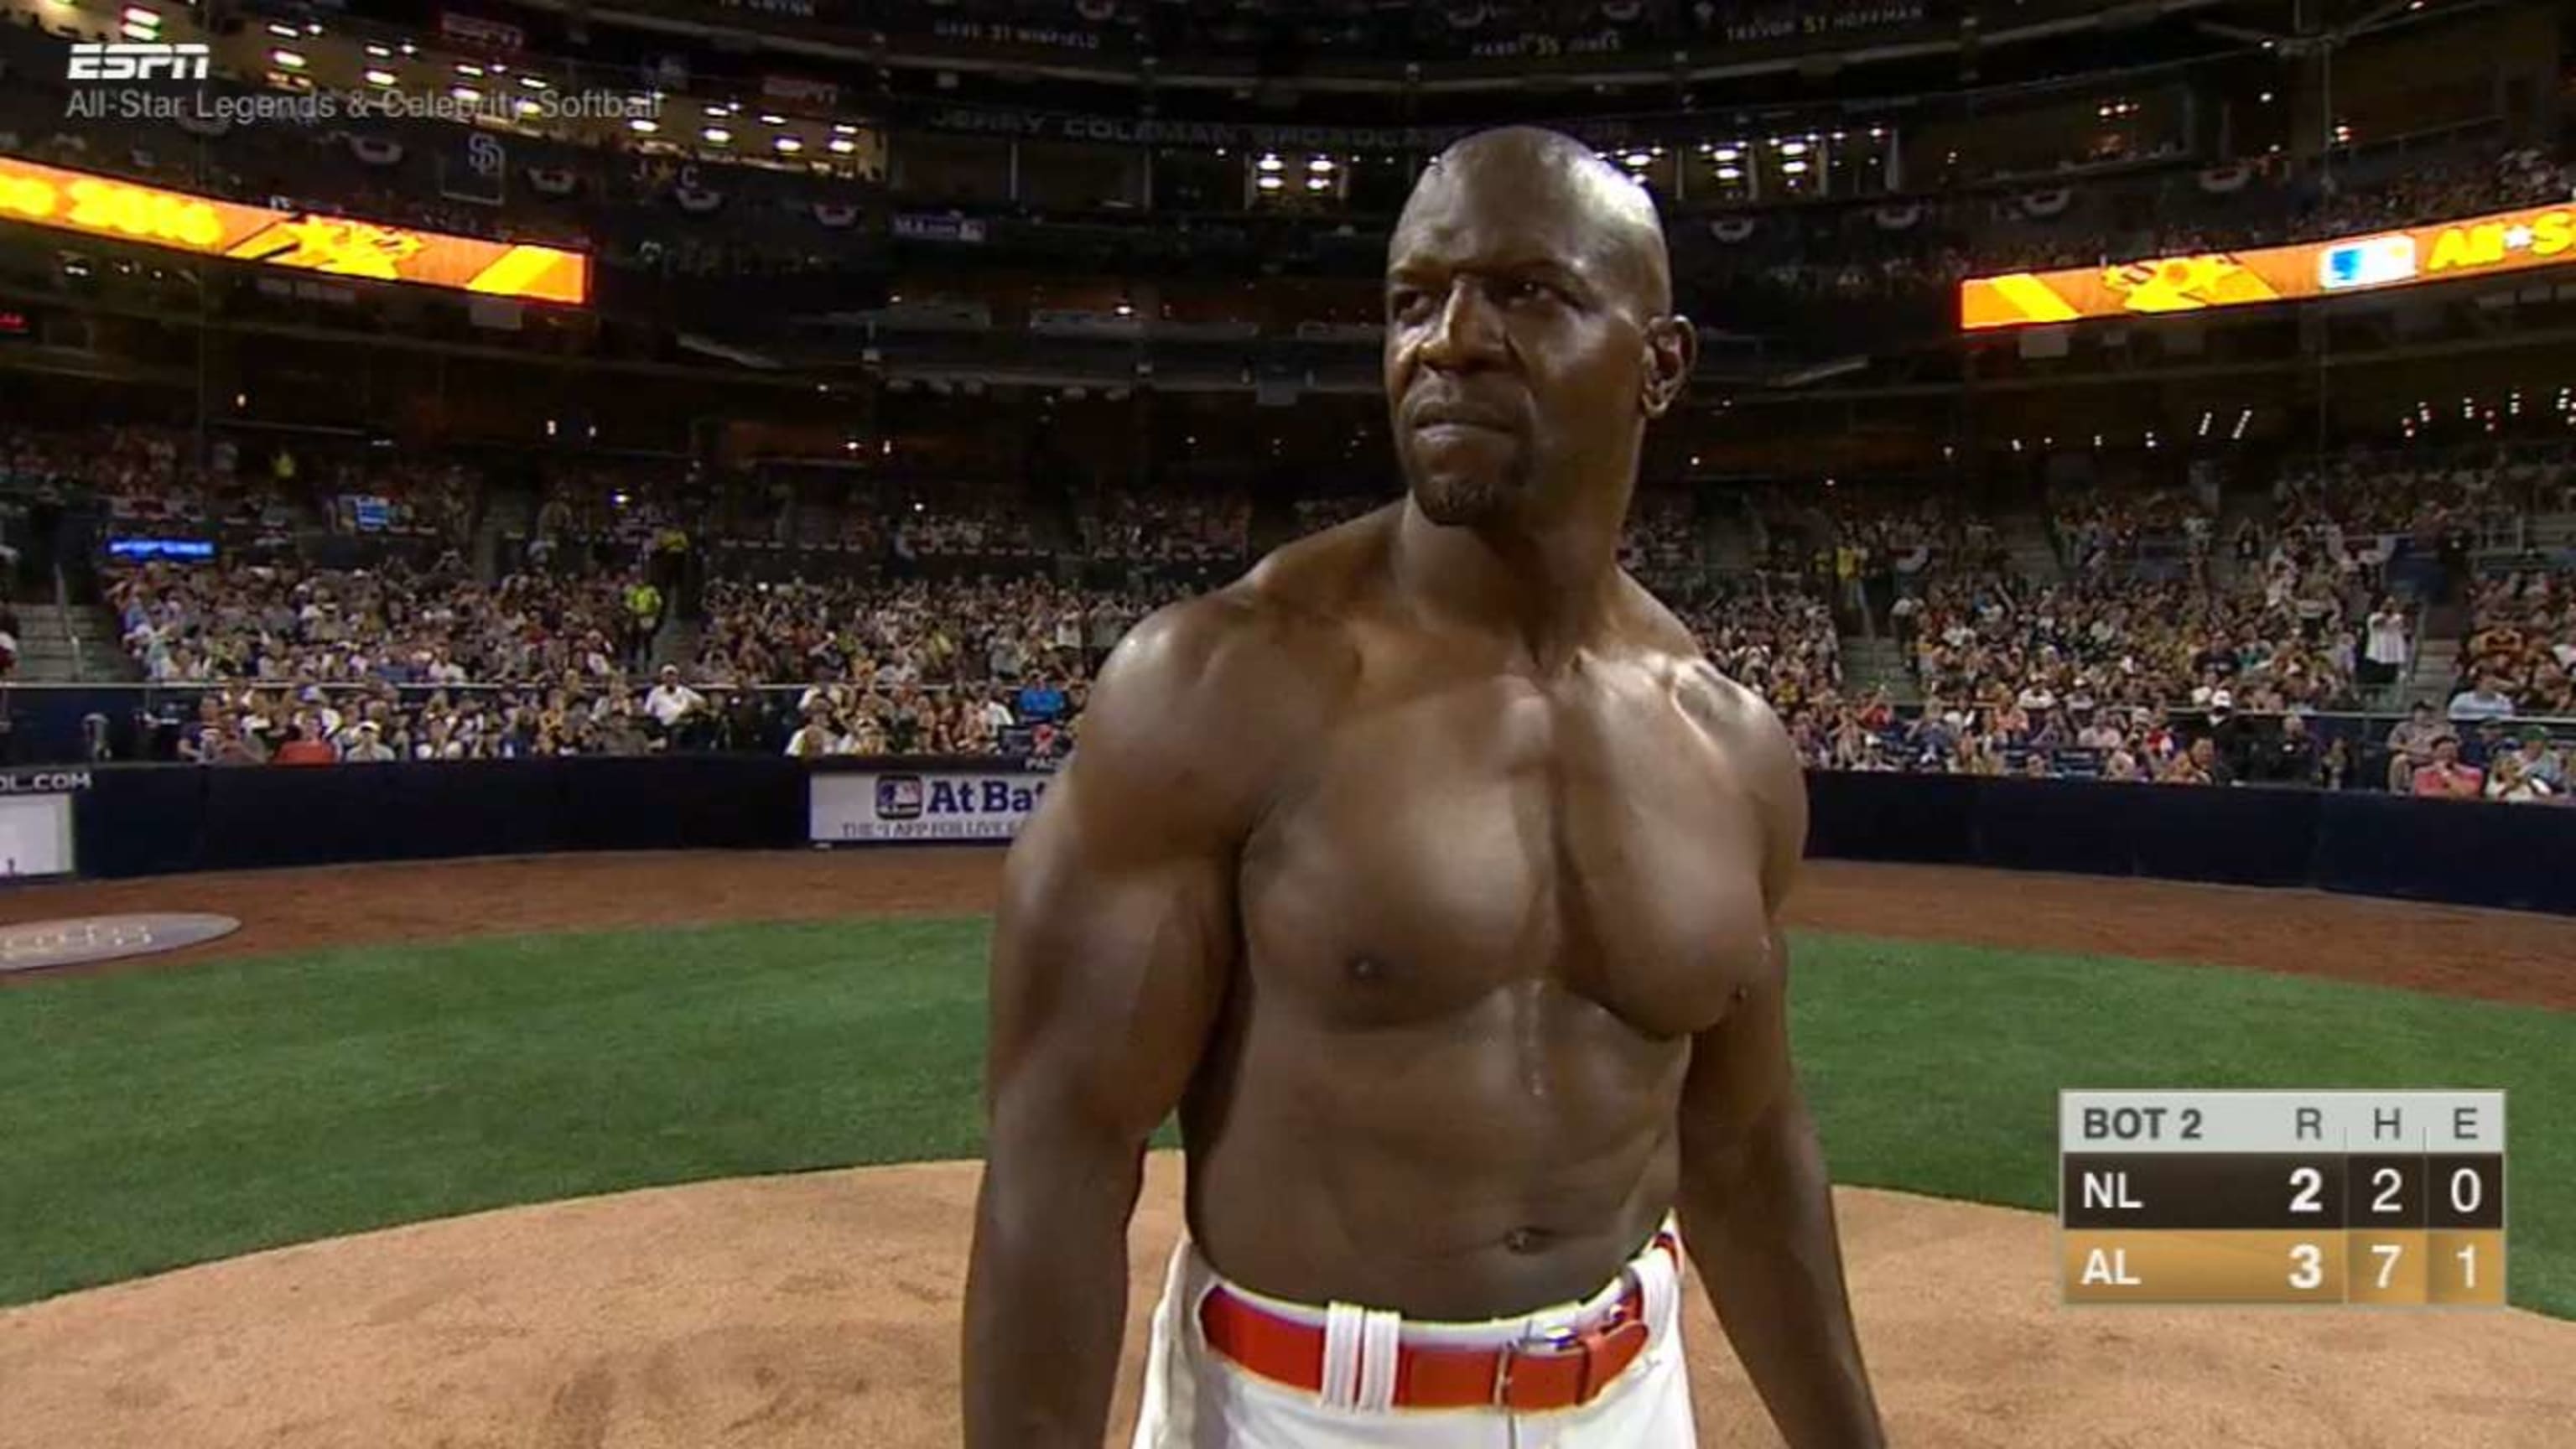 Terry Crews flexed his bare chest during the Celebrity Softball